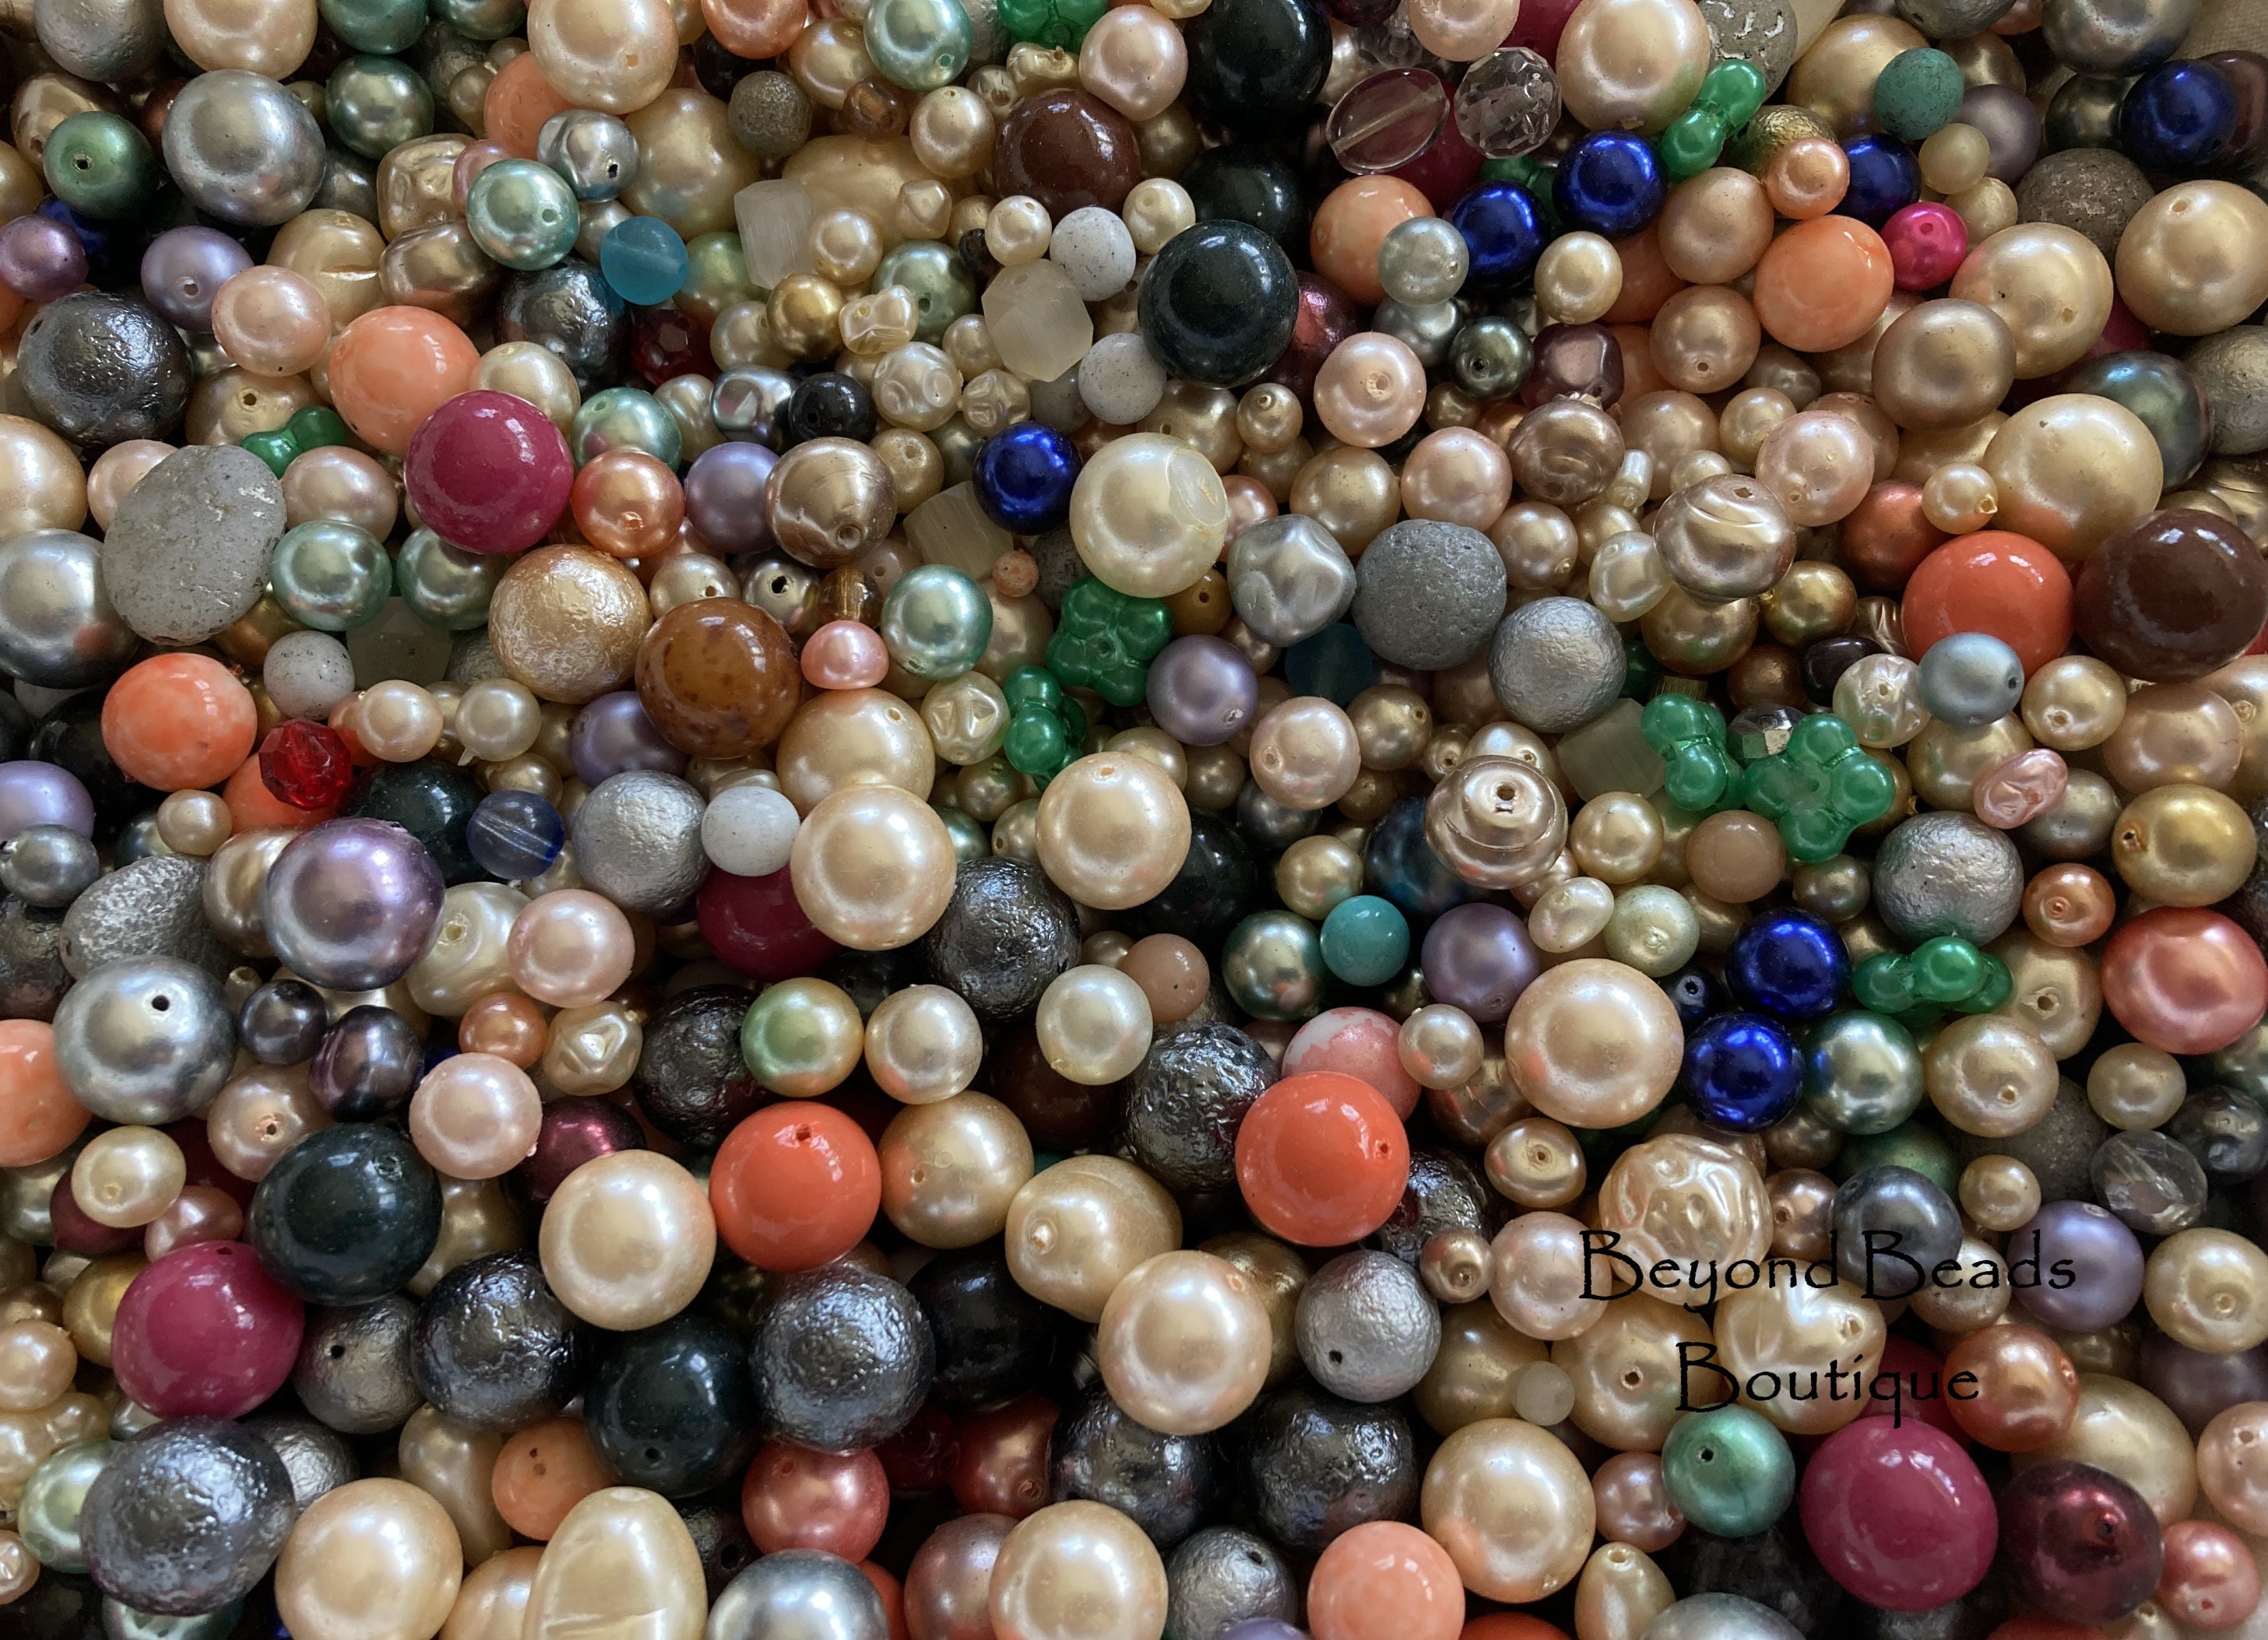 Silver Beads for Jewelry Making Plastic Beads Mix Shape Size Bulk Lot 1+ lb